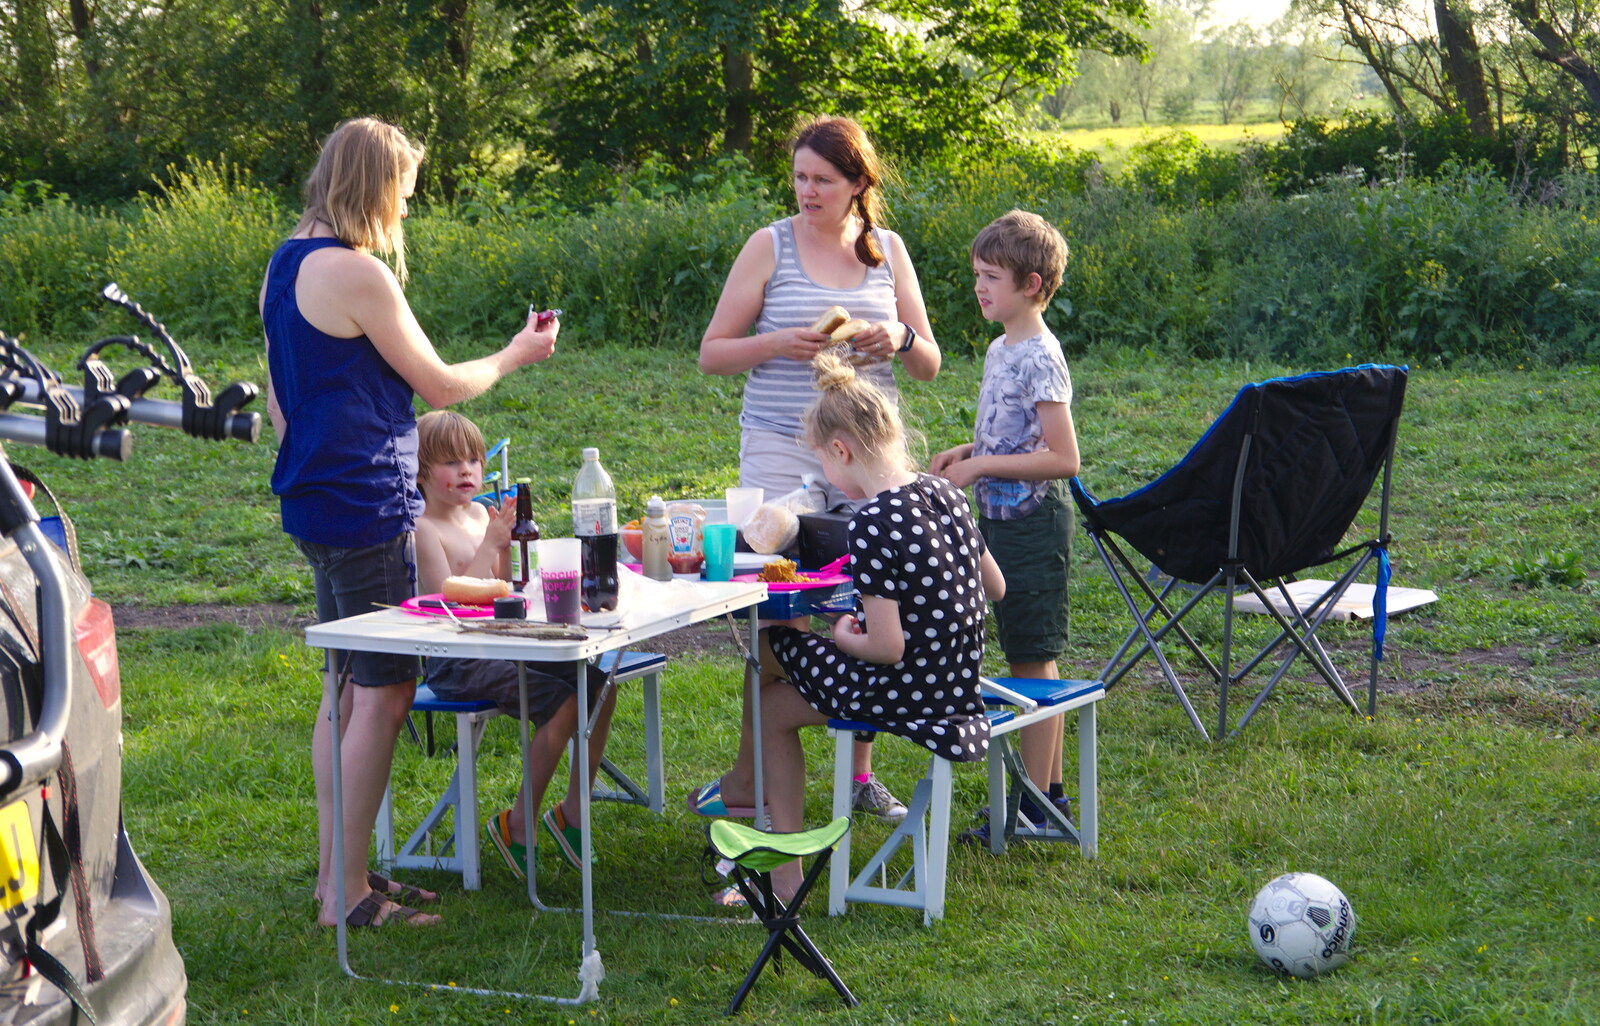 Camp-site tea time from Camping at Three Rivers, Geldeston, Norfolk - 1st June 2019